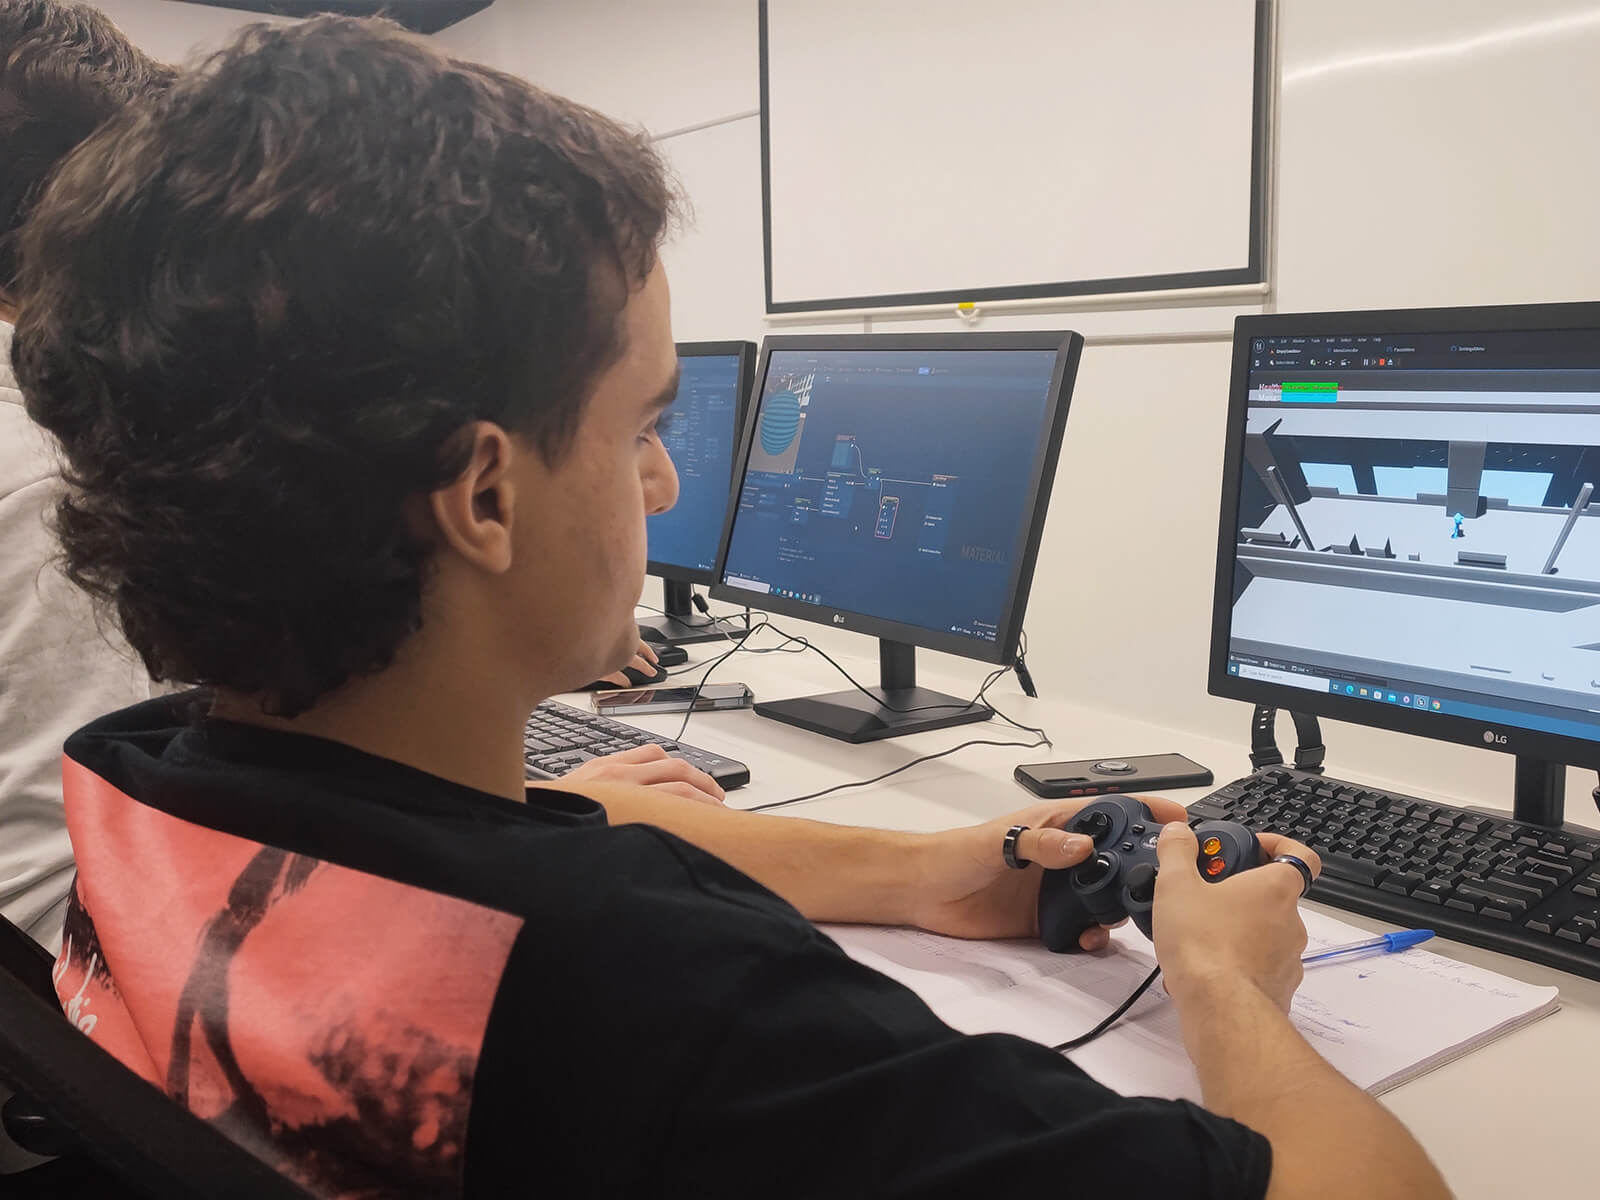 A student playtests an early version of a game while using a controller and looking at a monitor